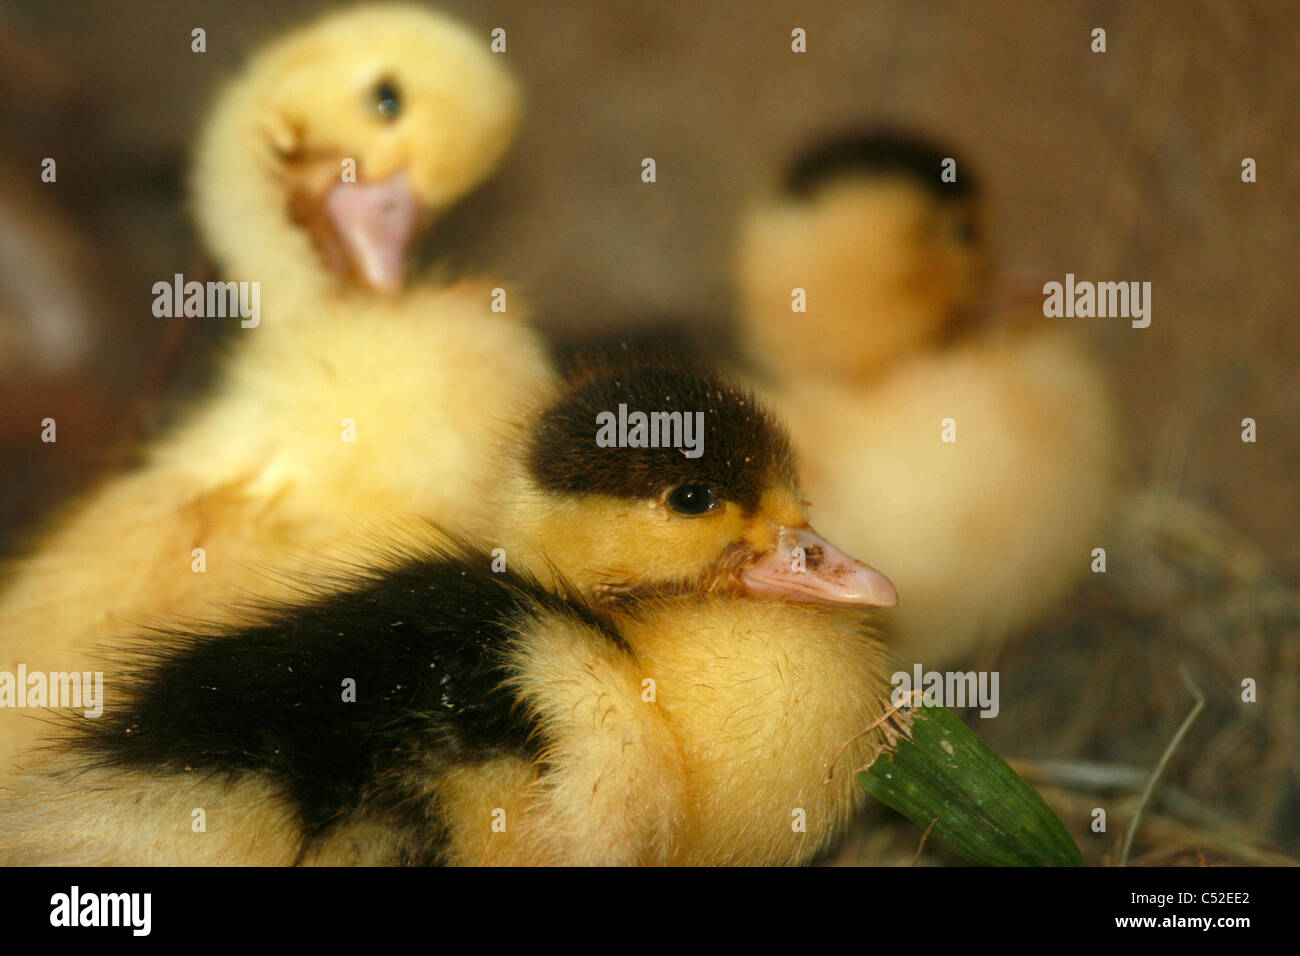 Young Muscovy ducklings (Cairina moschata) Stock Photo